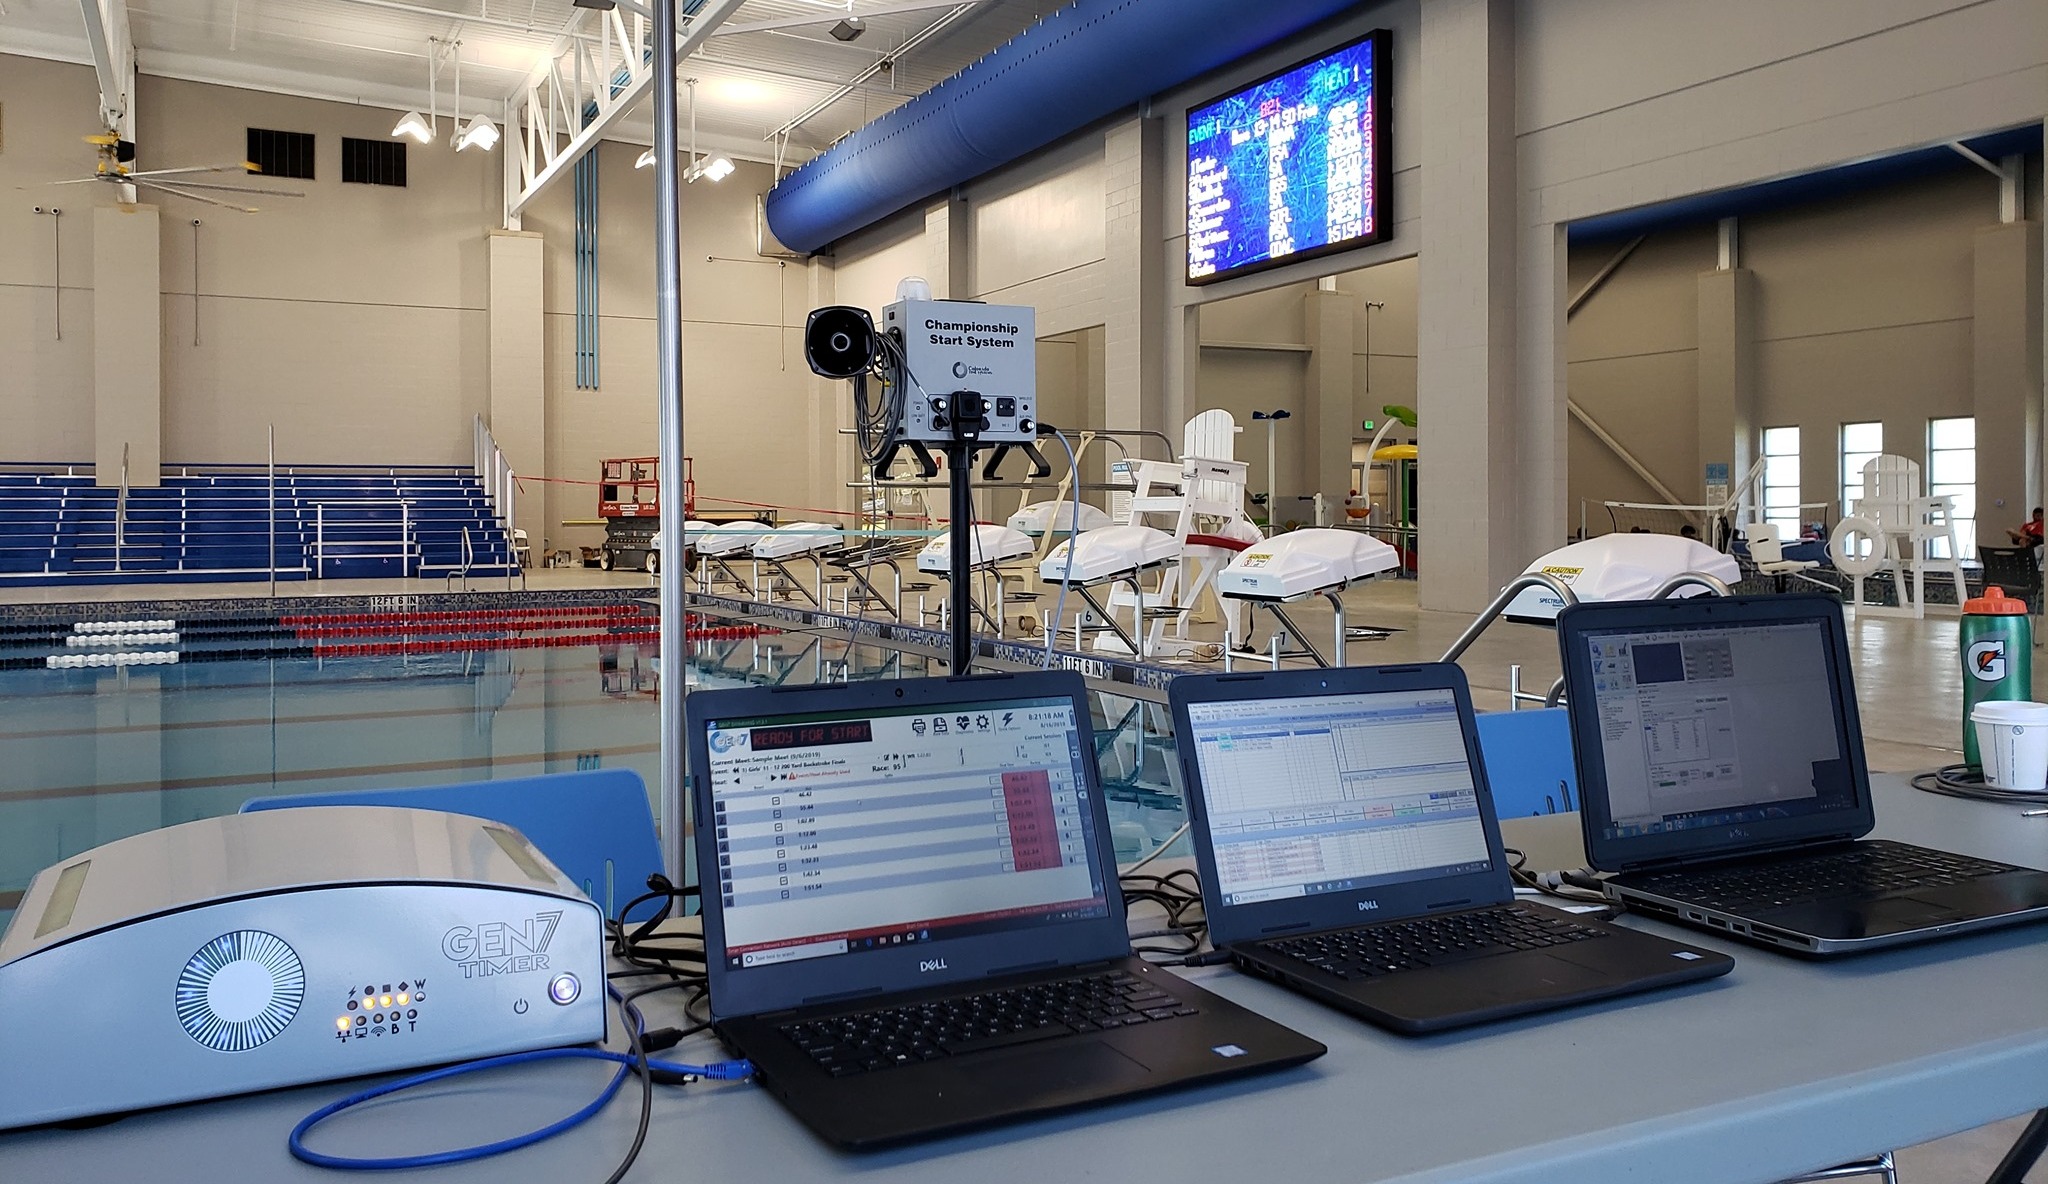 Colorado Time Systems LED Video Scoreboard, Championship Start System and GEN7 Swim Timing System at an indoor competitive pool. 